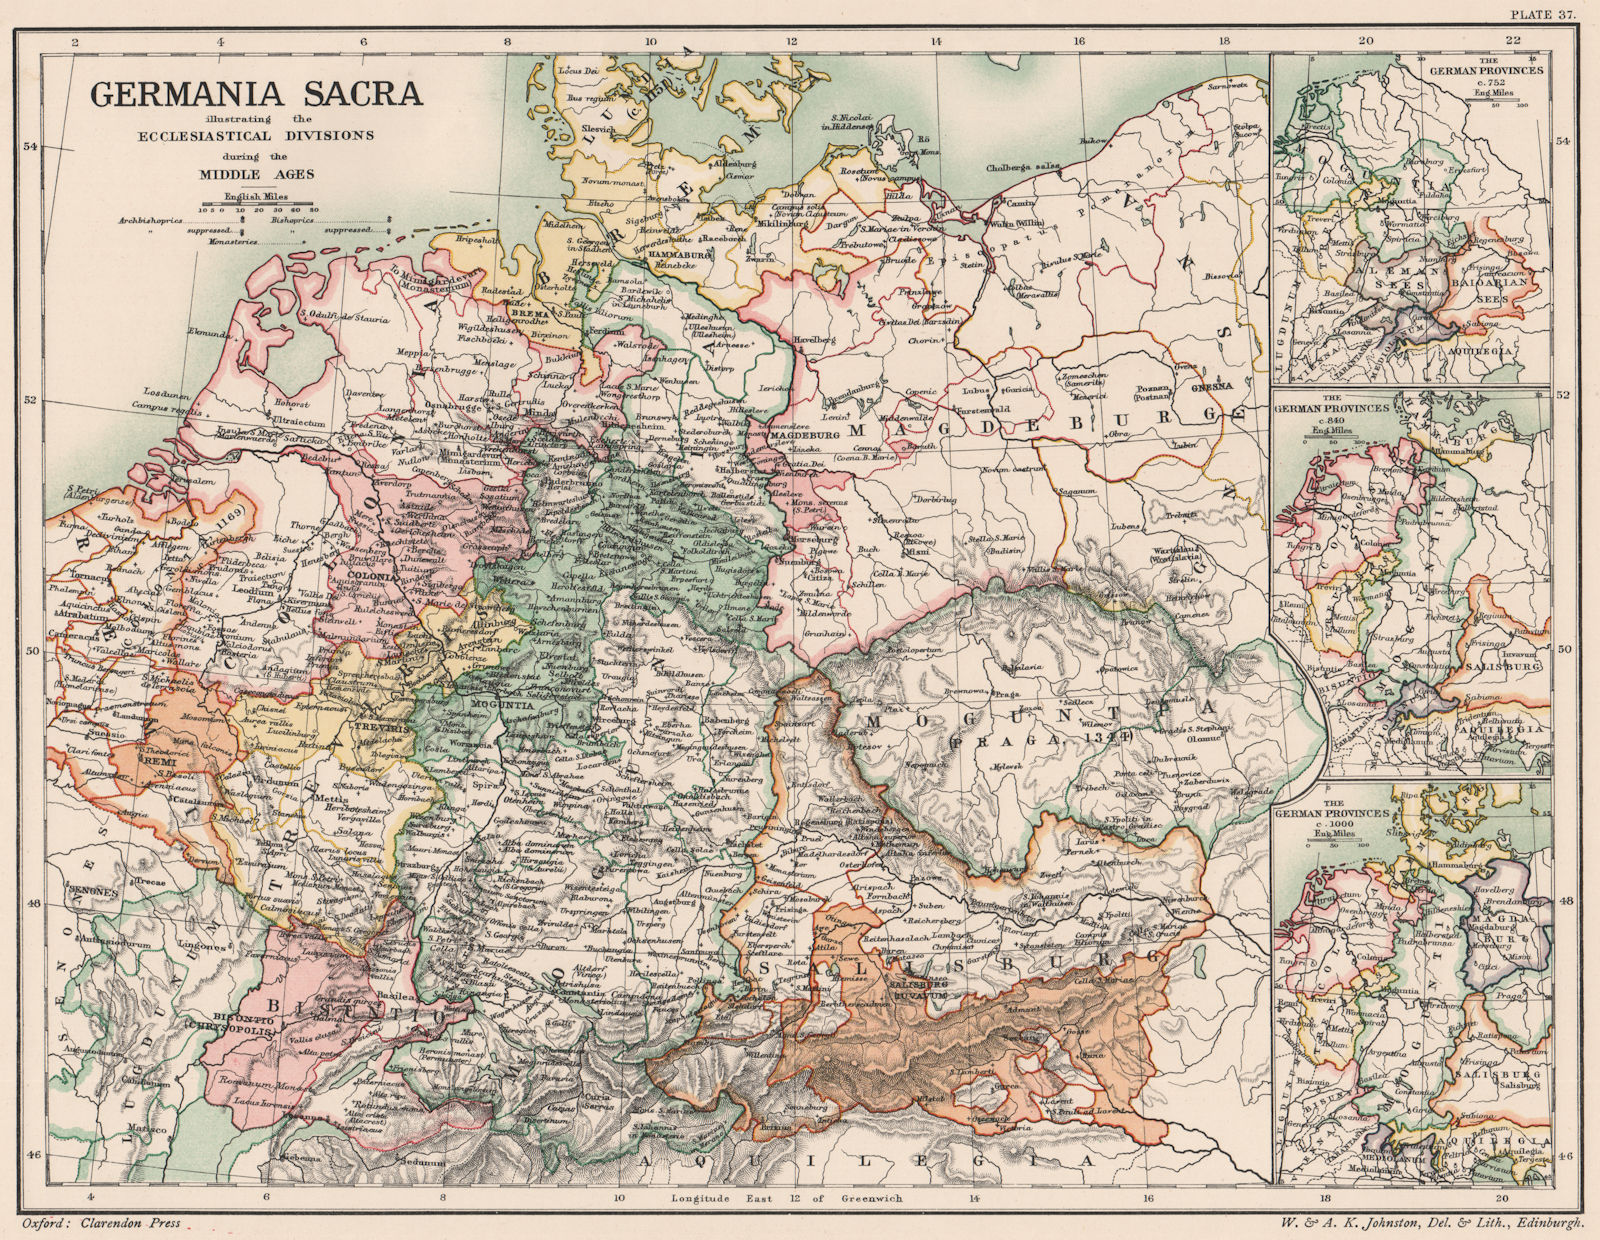 Associate Product GERMANIA SACRA.Medieval eccl.divisions.Germany provinces 752 840 1000 1902 map